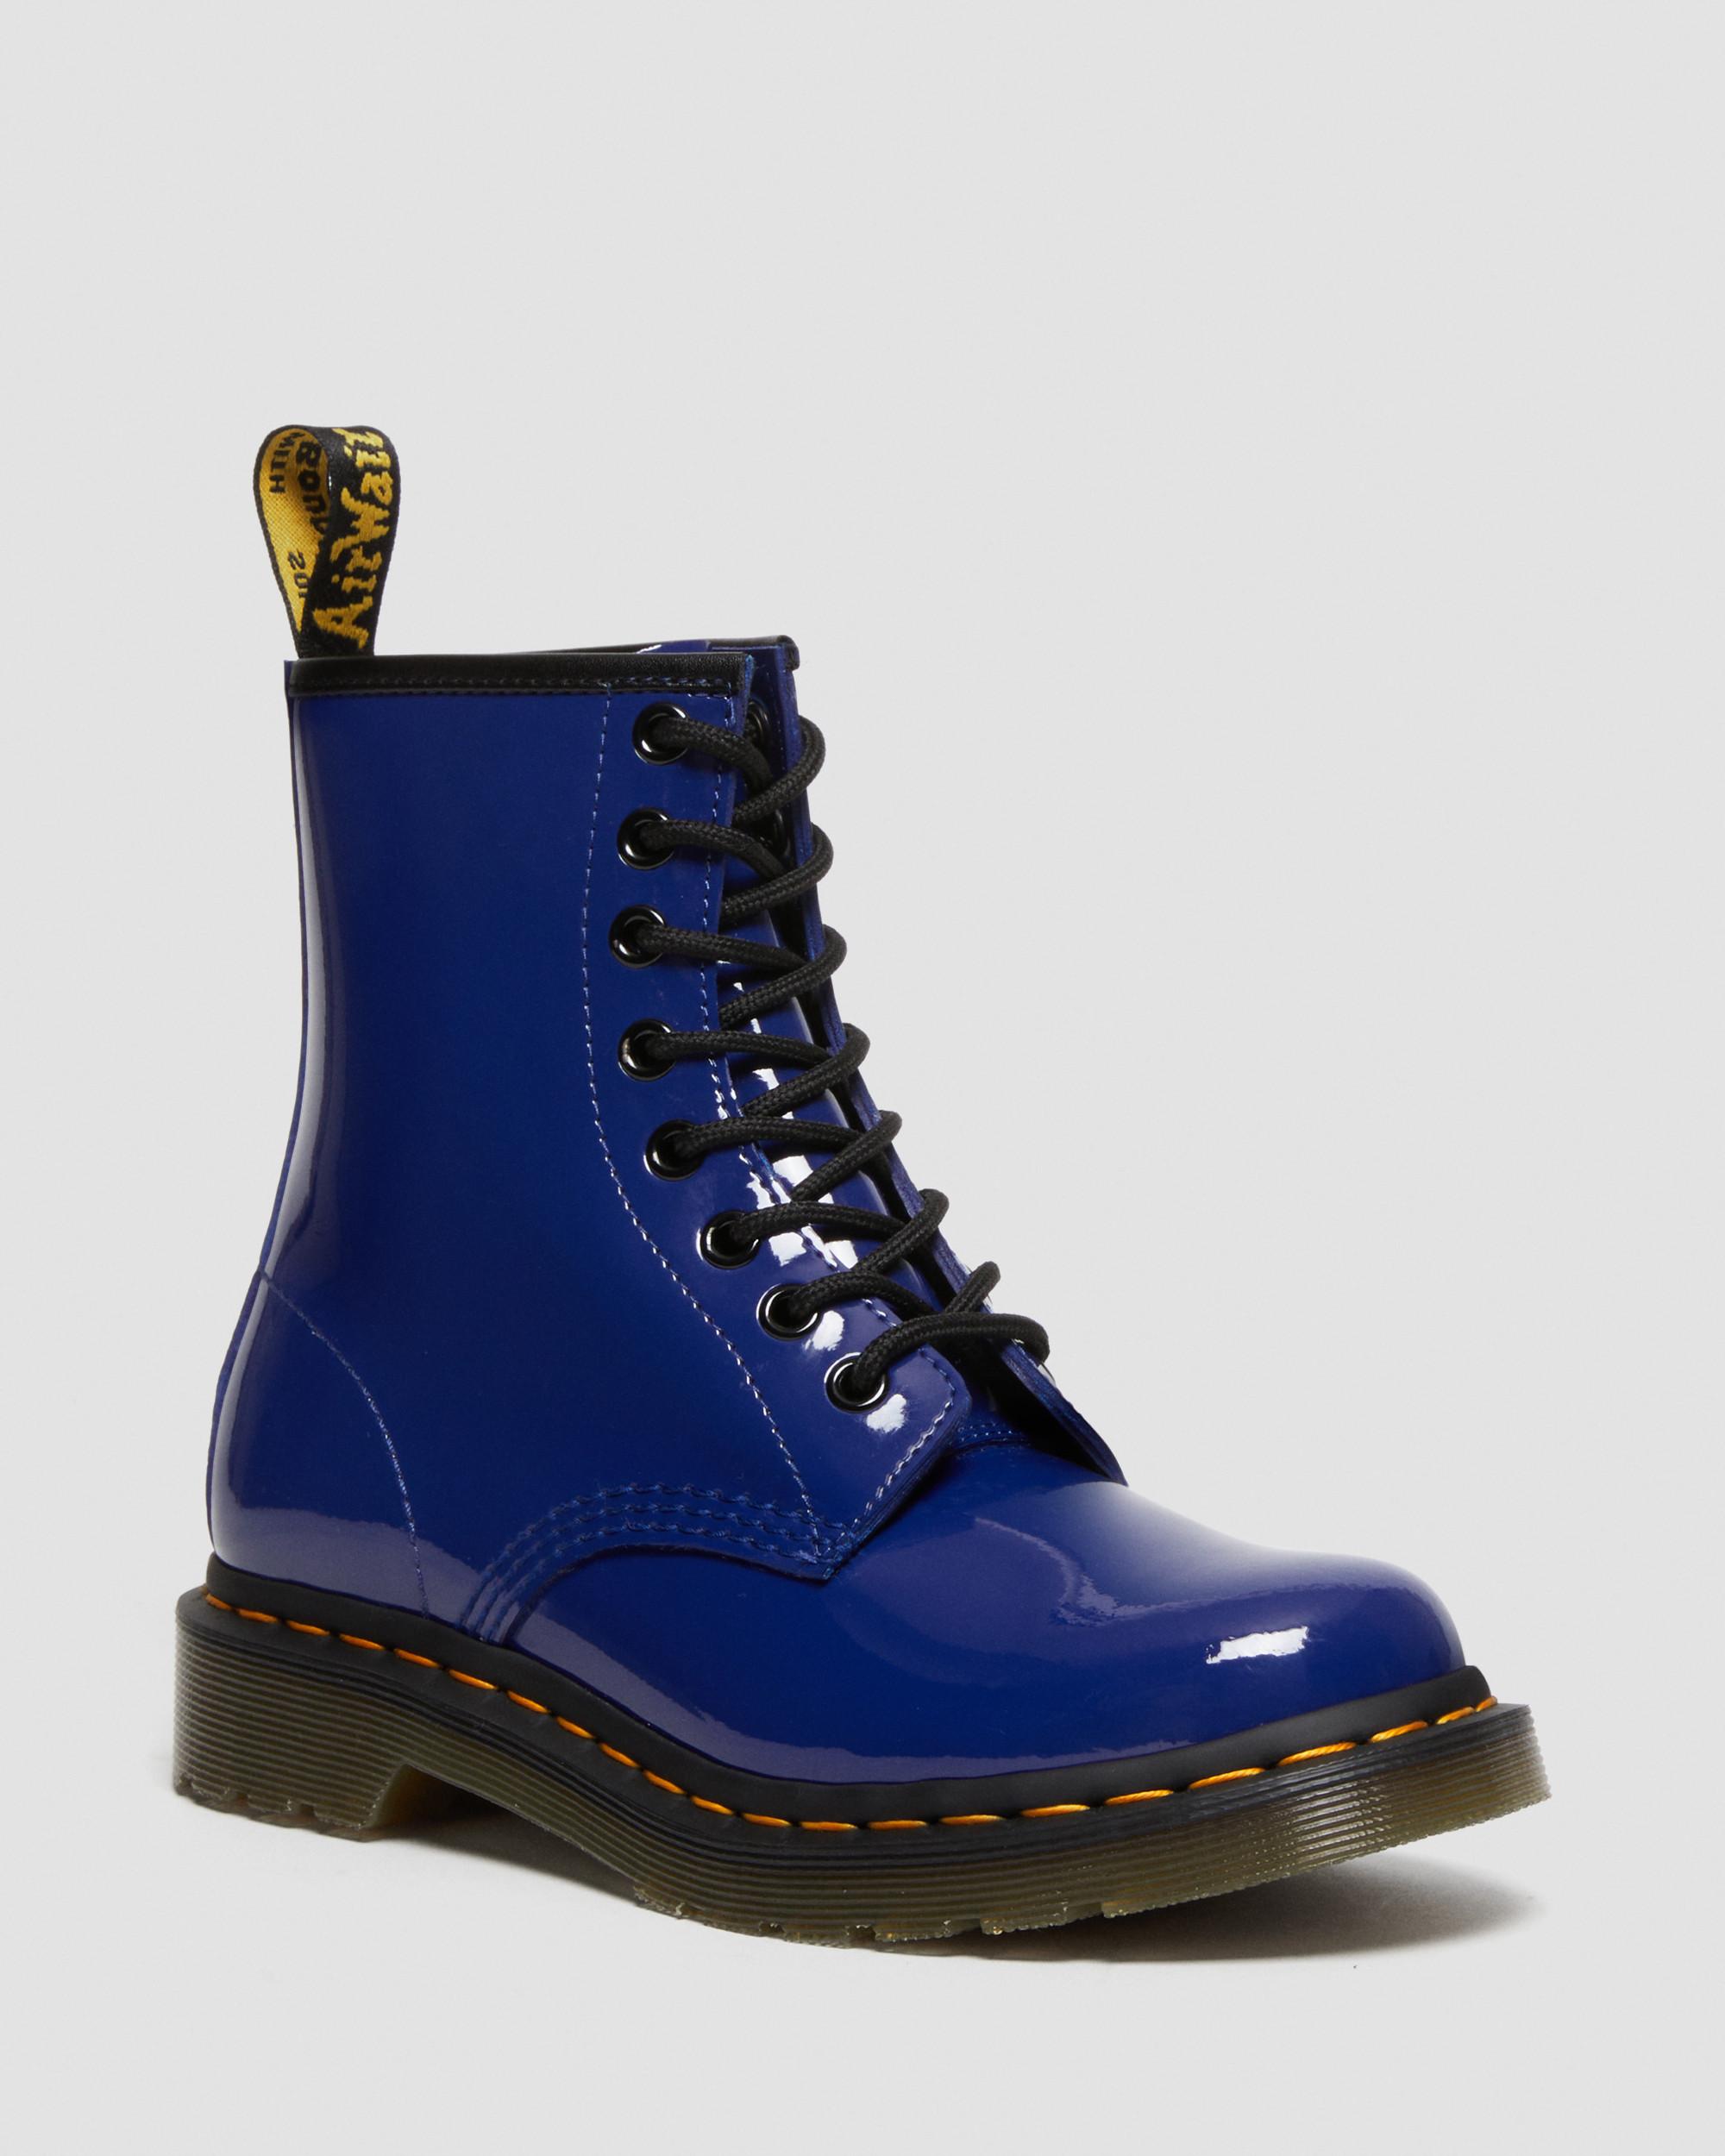 DR MARTENS 1460 Women's Patent Leather Lace Up Boots